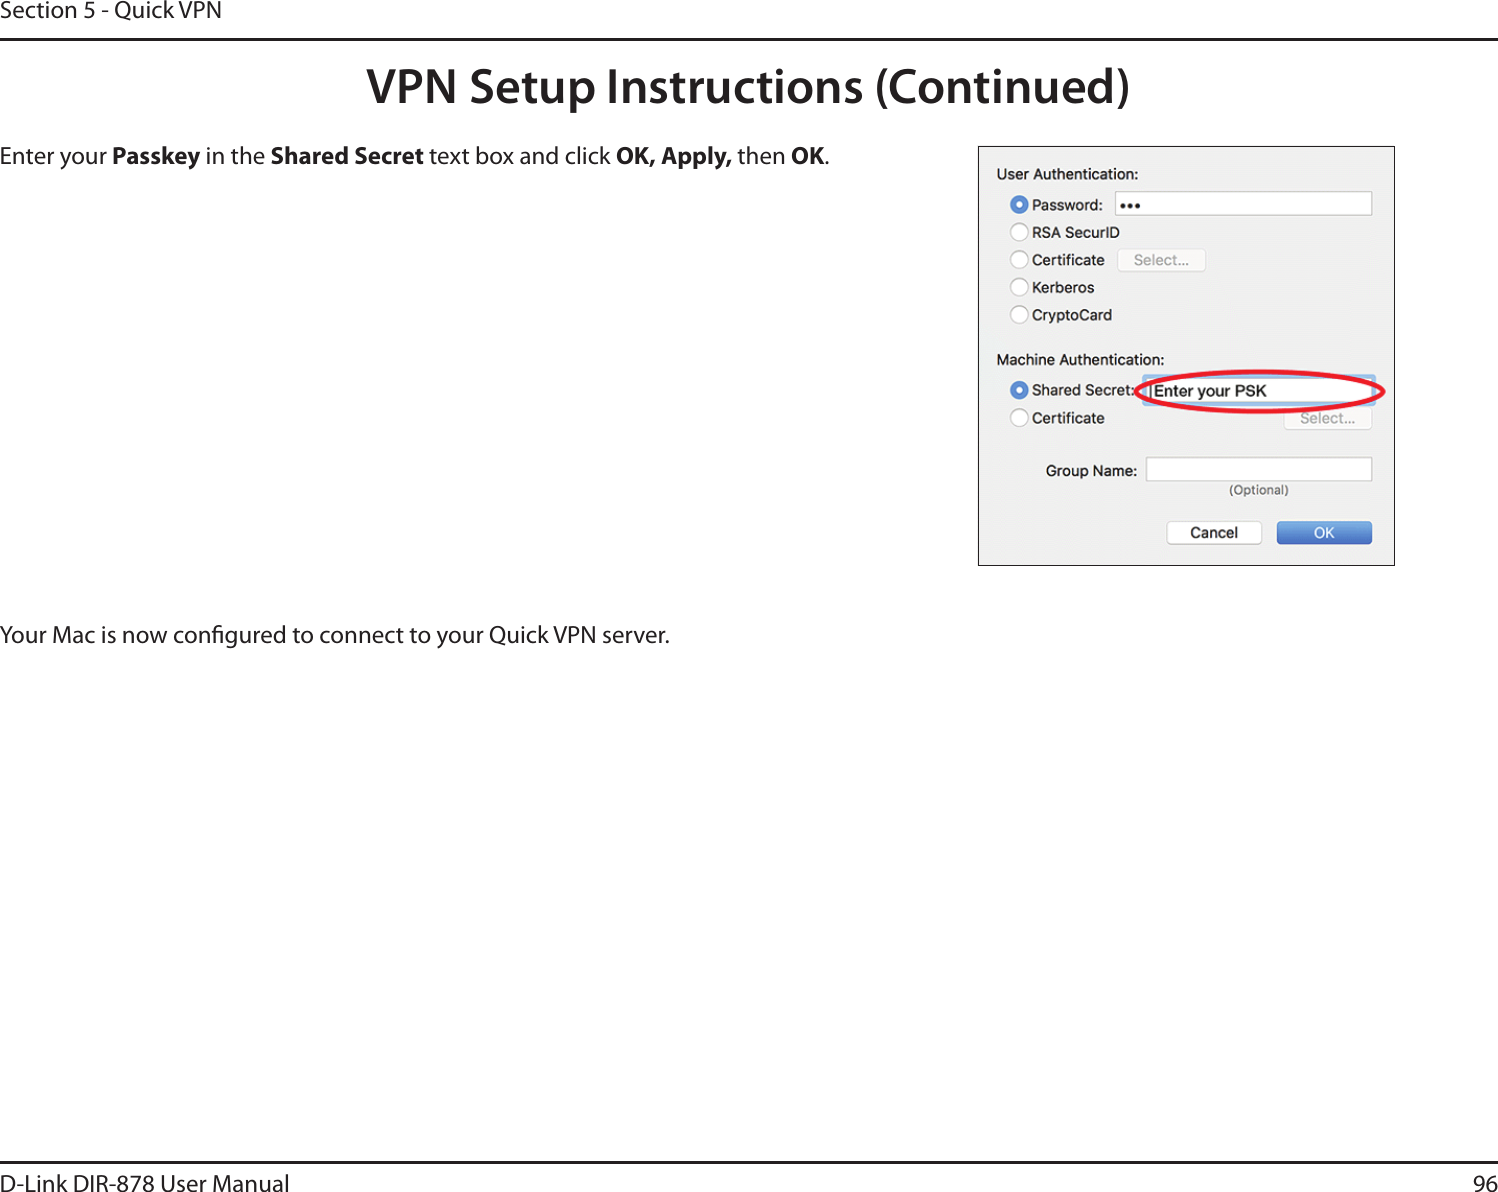 96D-Link DIR-878 User ManualSection 5 - Quick VPNEnter your Passkey in the Shared Secret text box and click 0,&quot;QQMZthen OK.Your Mac is now congured to connect to your Quick VPN server.VPN Setup Instructions (Continued)